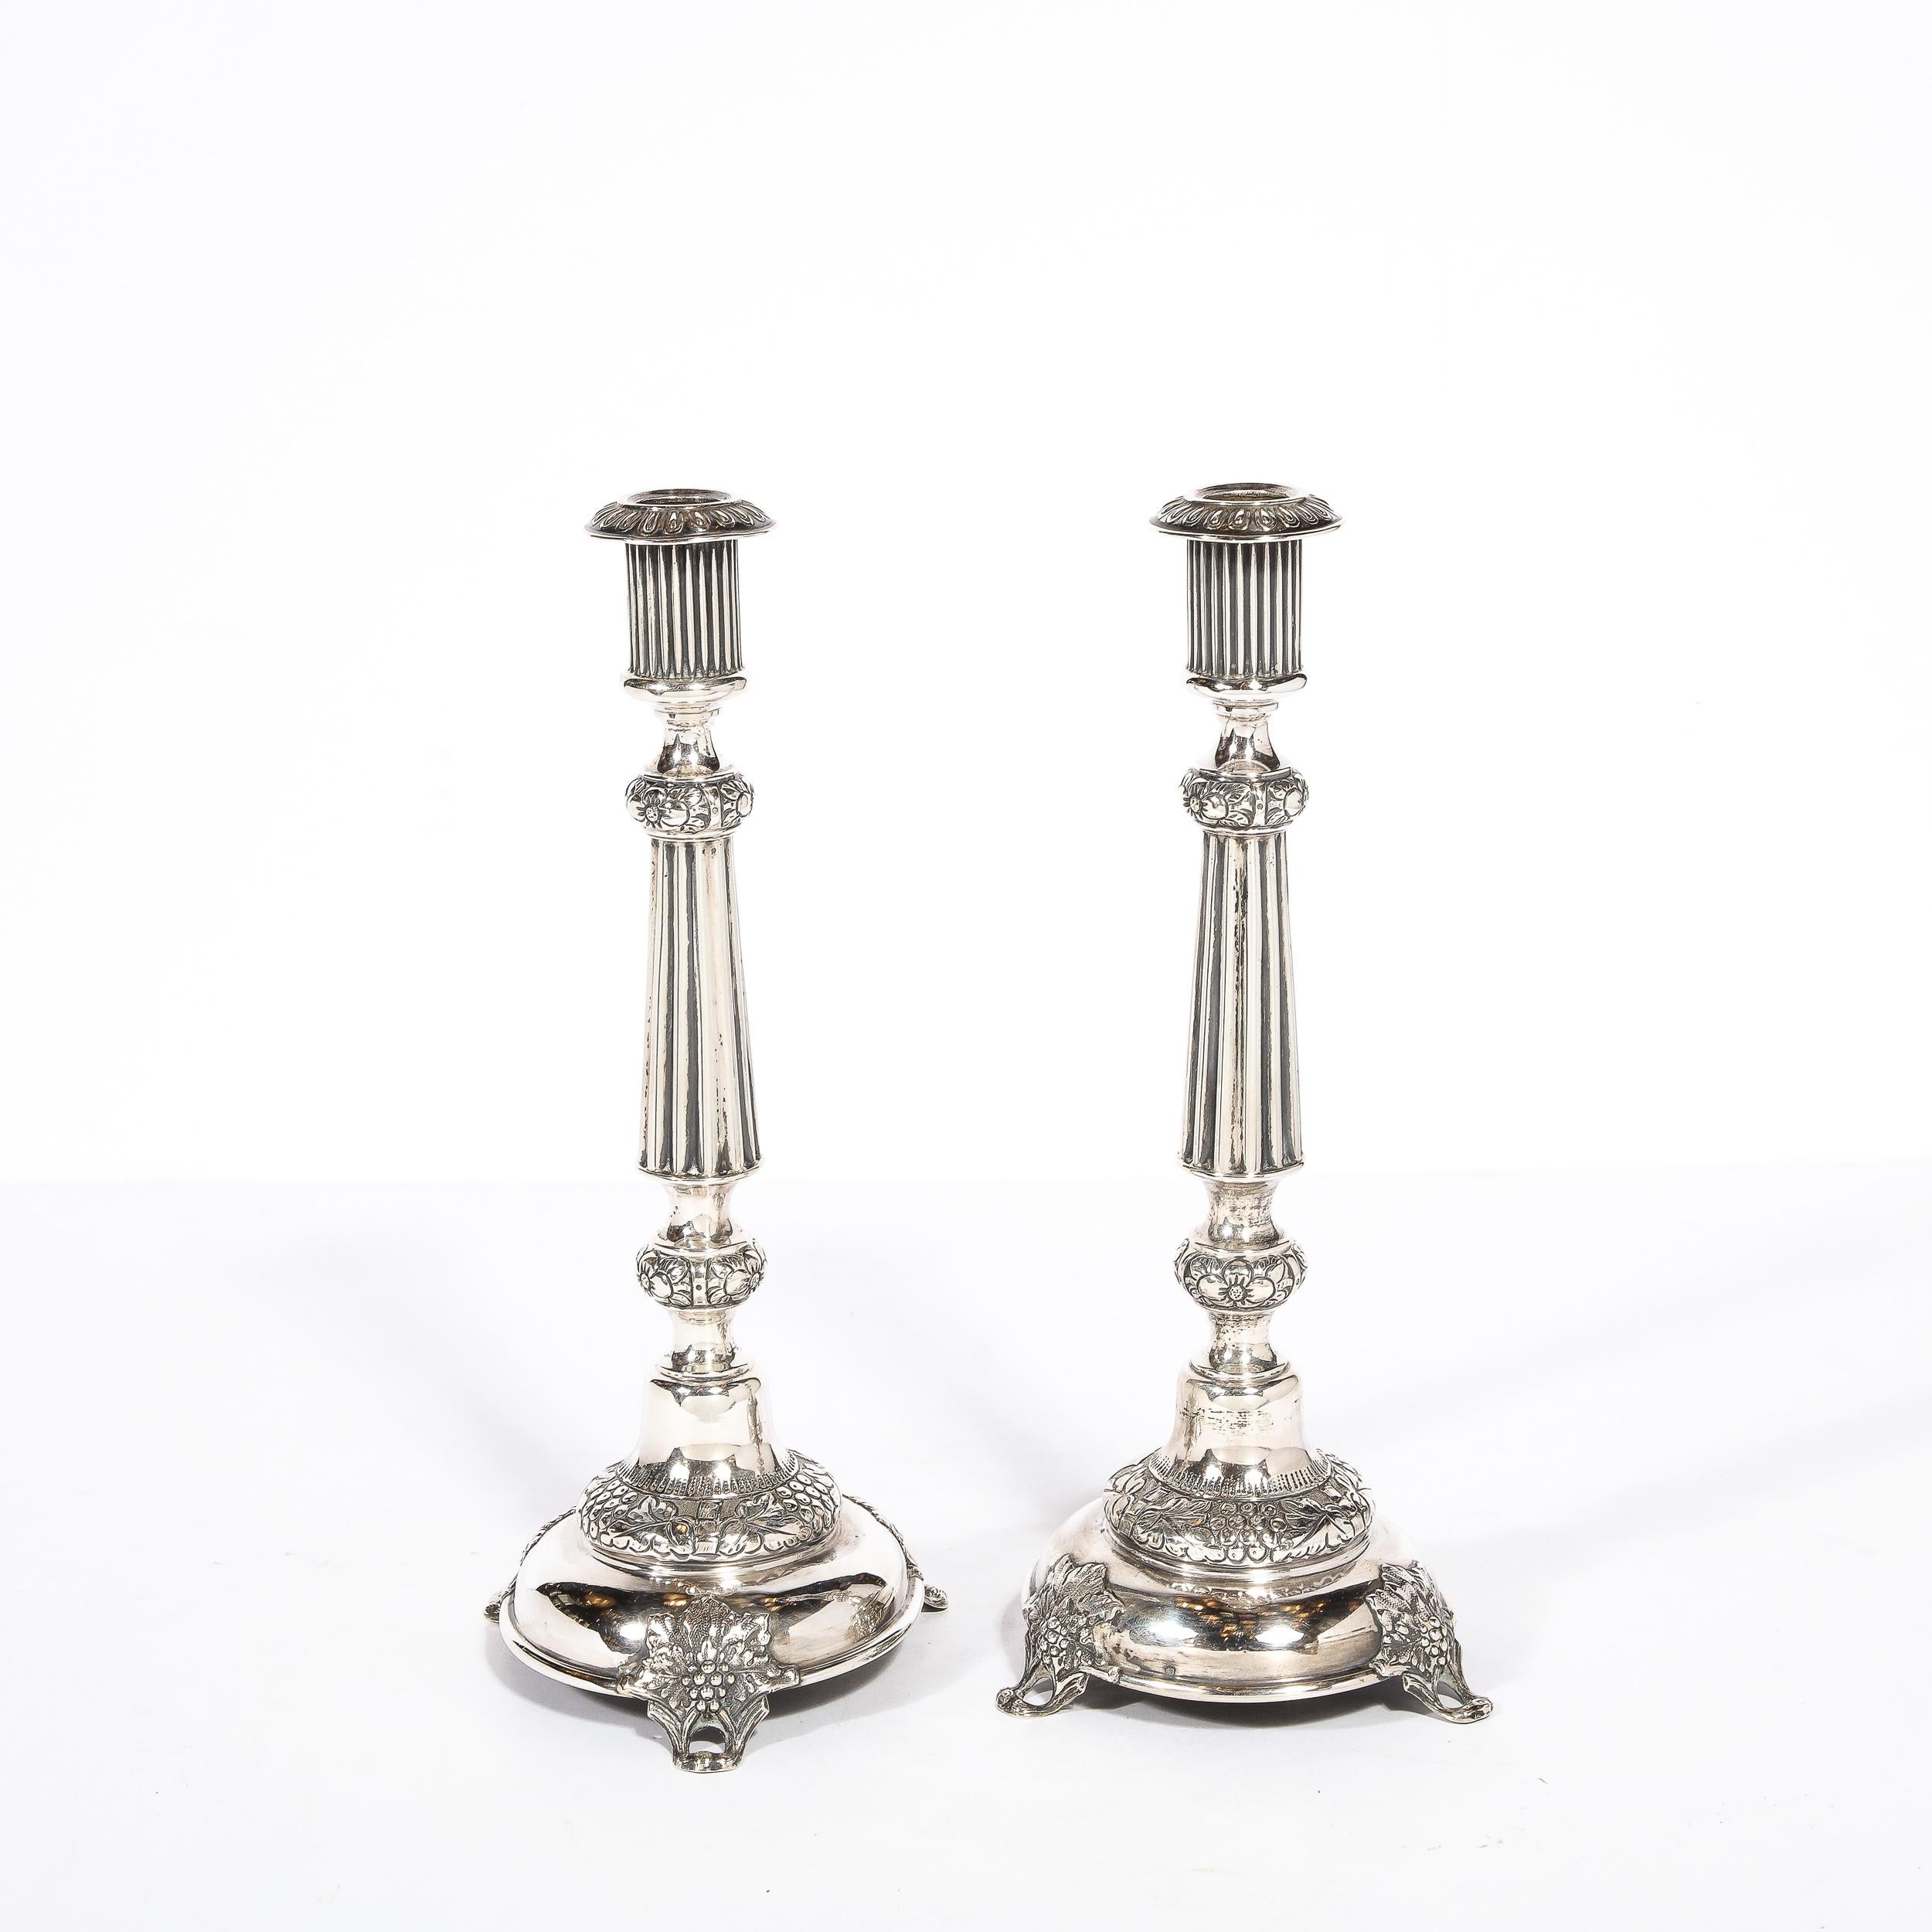 Neoclassical Pair of Antique Sterling Silver Sabbath Candle Holders Signed J. Ehrlich